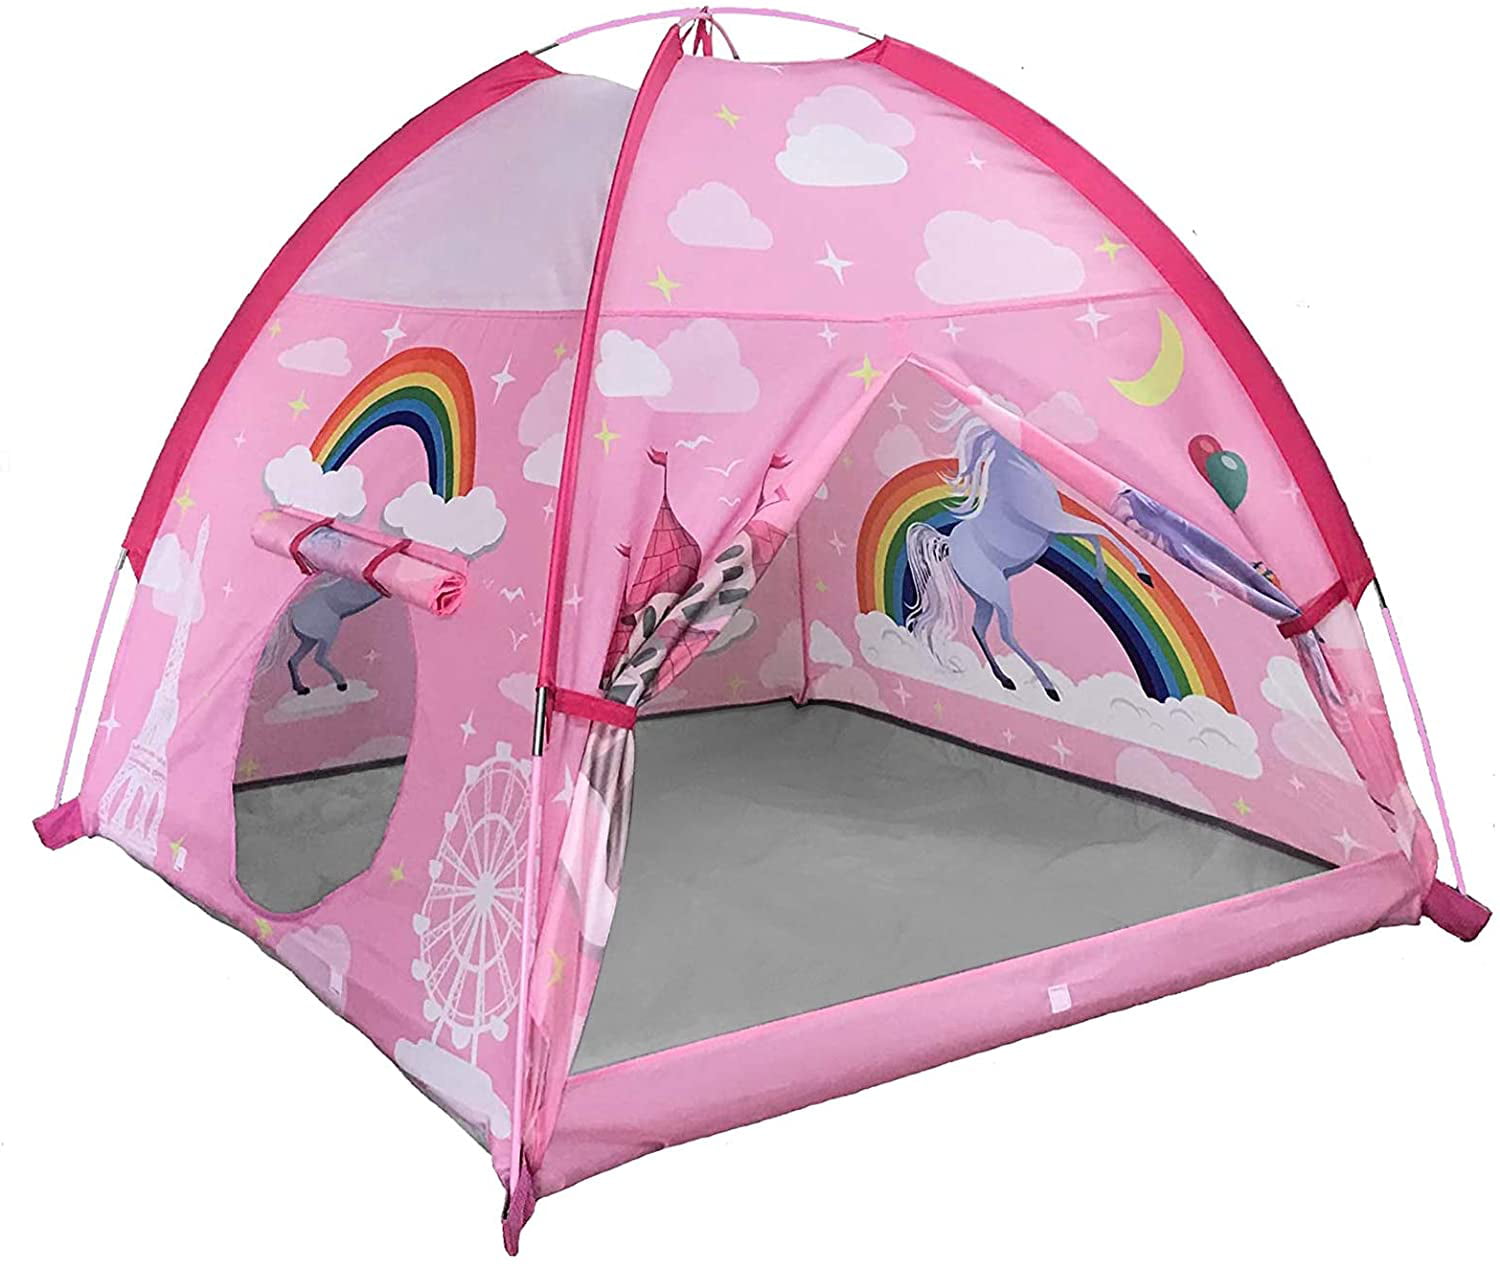 House Kids Play Tent Unicorn Playhouse for Children Indoor and Outdoor 